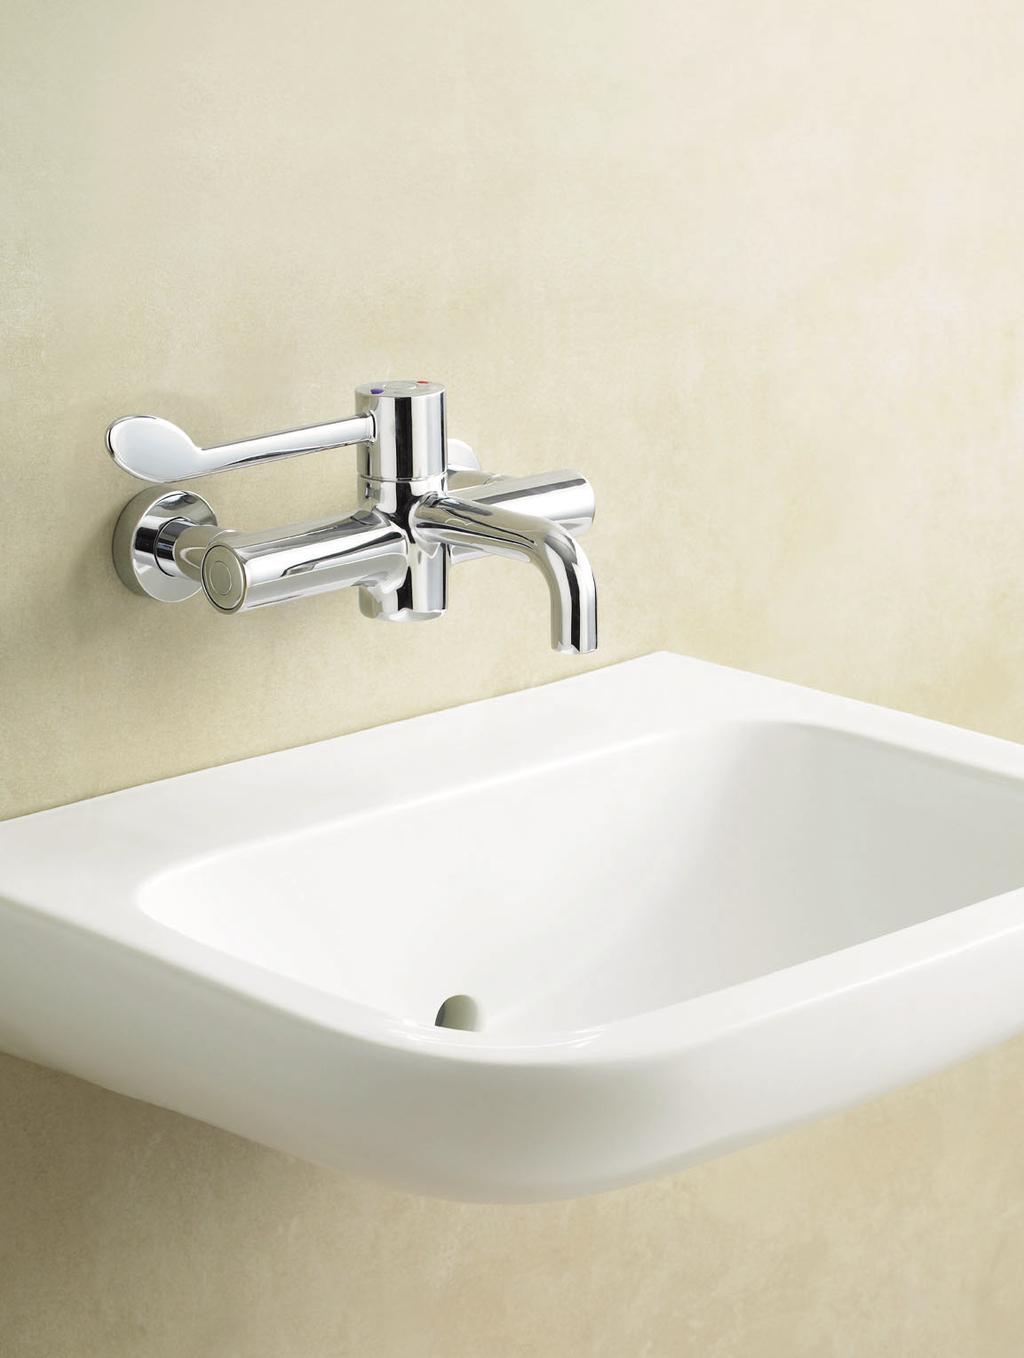 hospital ceramics the healthcare industries leading sanitaryware is manufactured at europe s most modern bathroom factory near to rugeley in staffordshire.